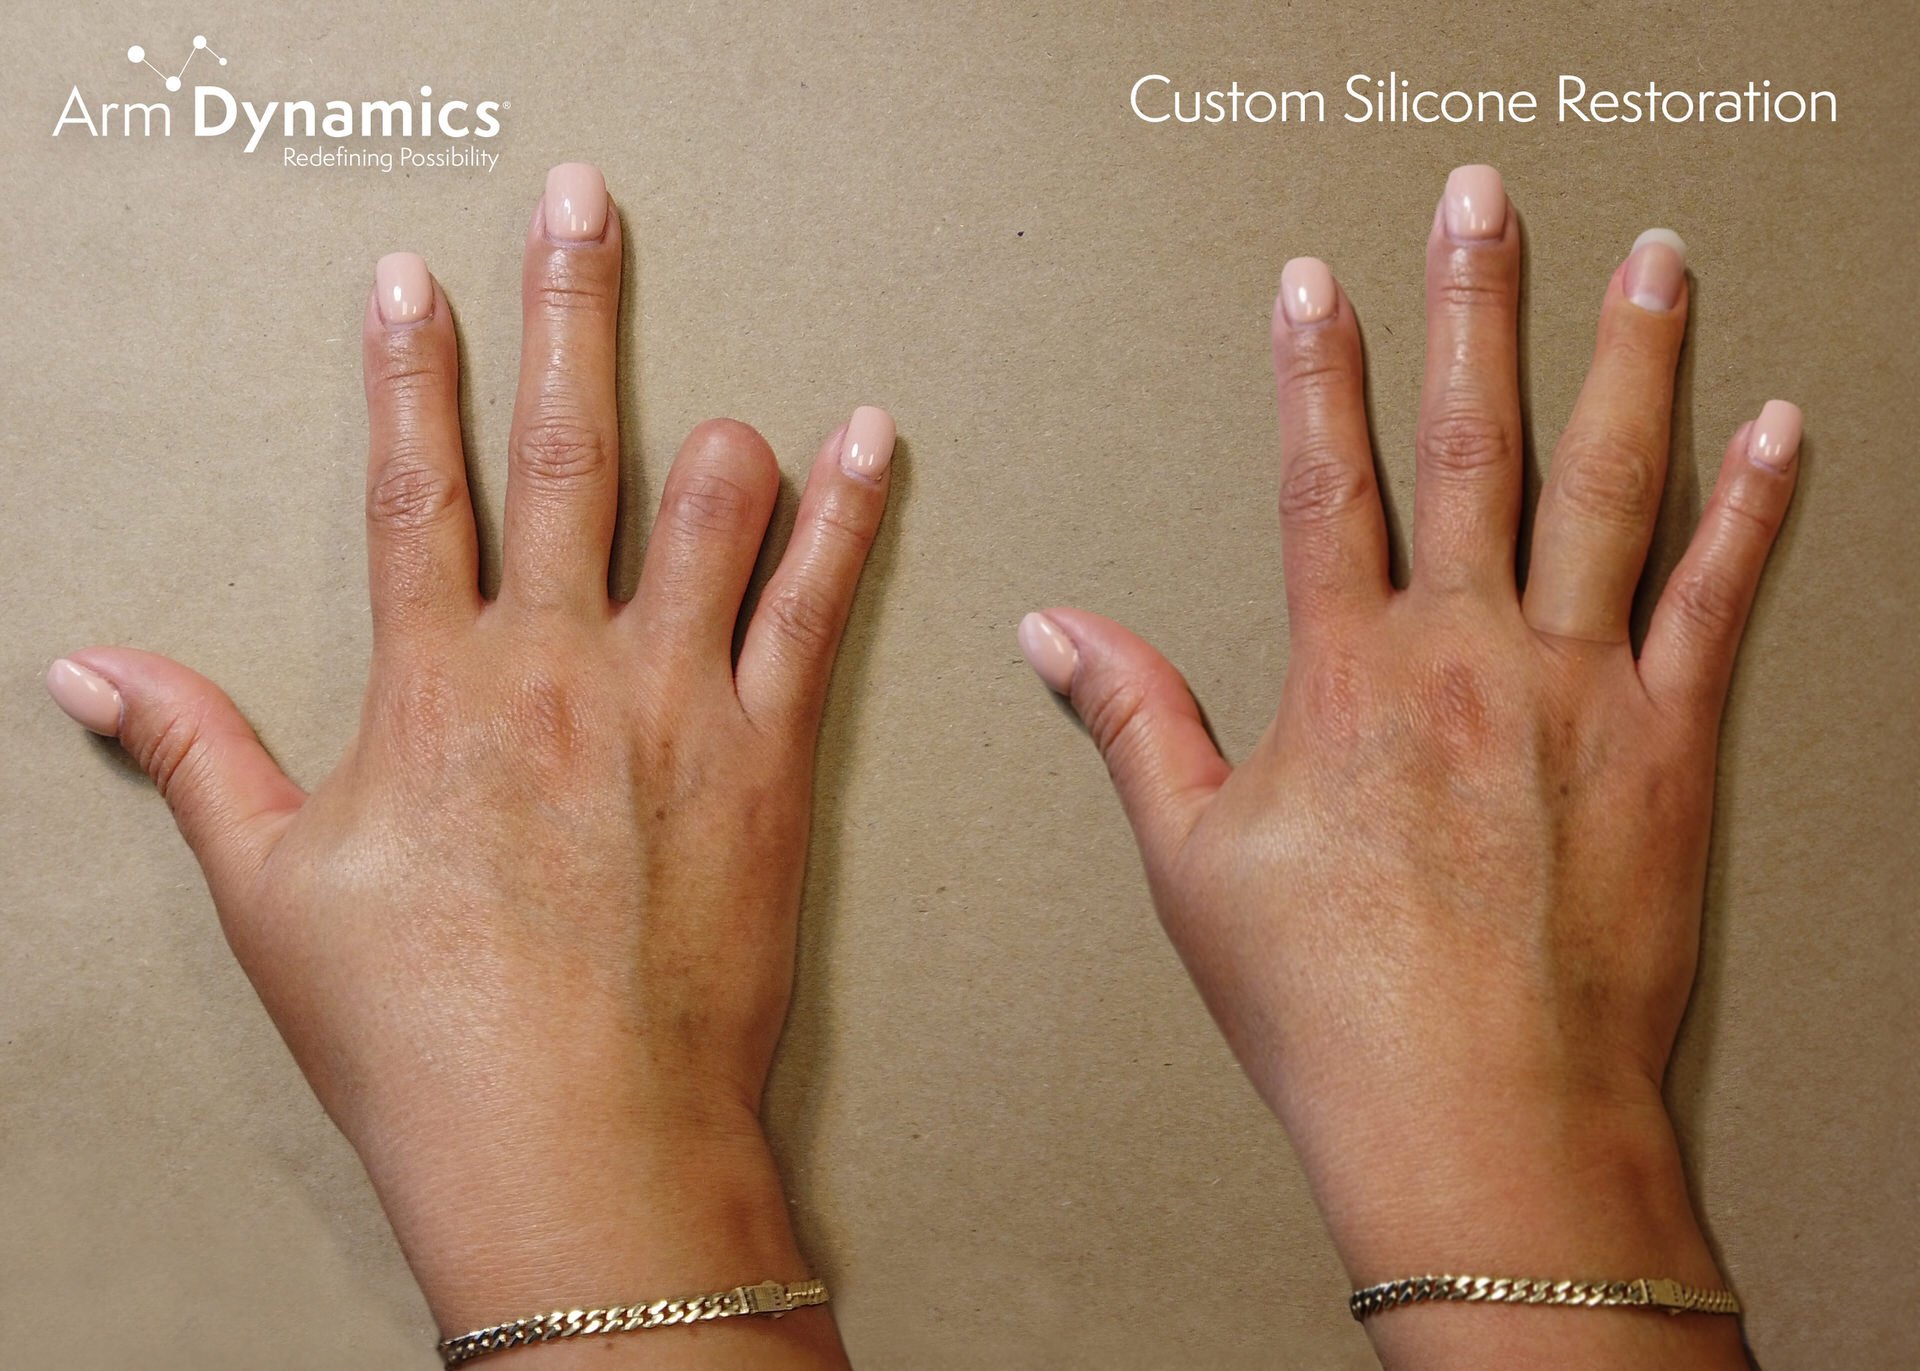 Custom Silicone Restoration for a partial hand patient. Before and after.